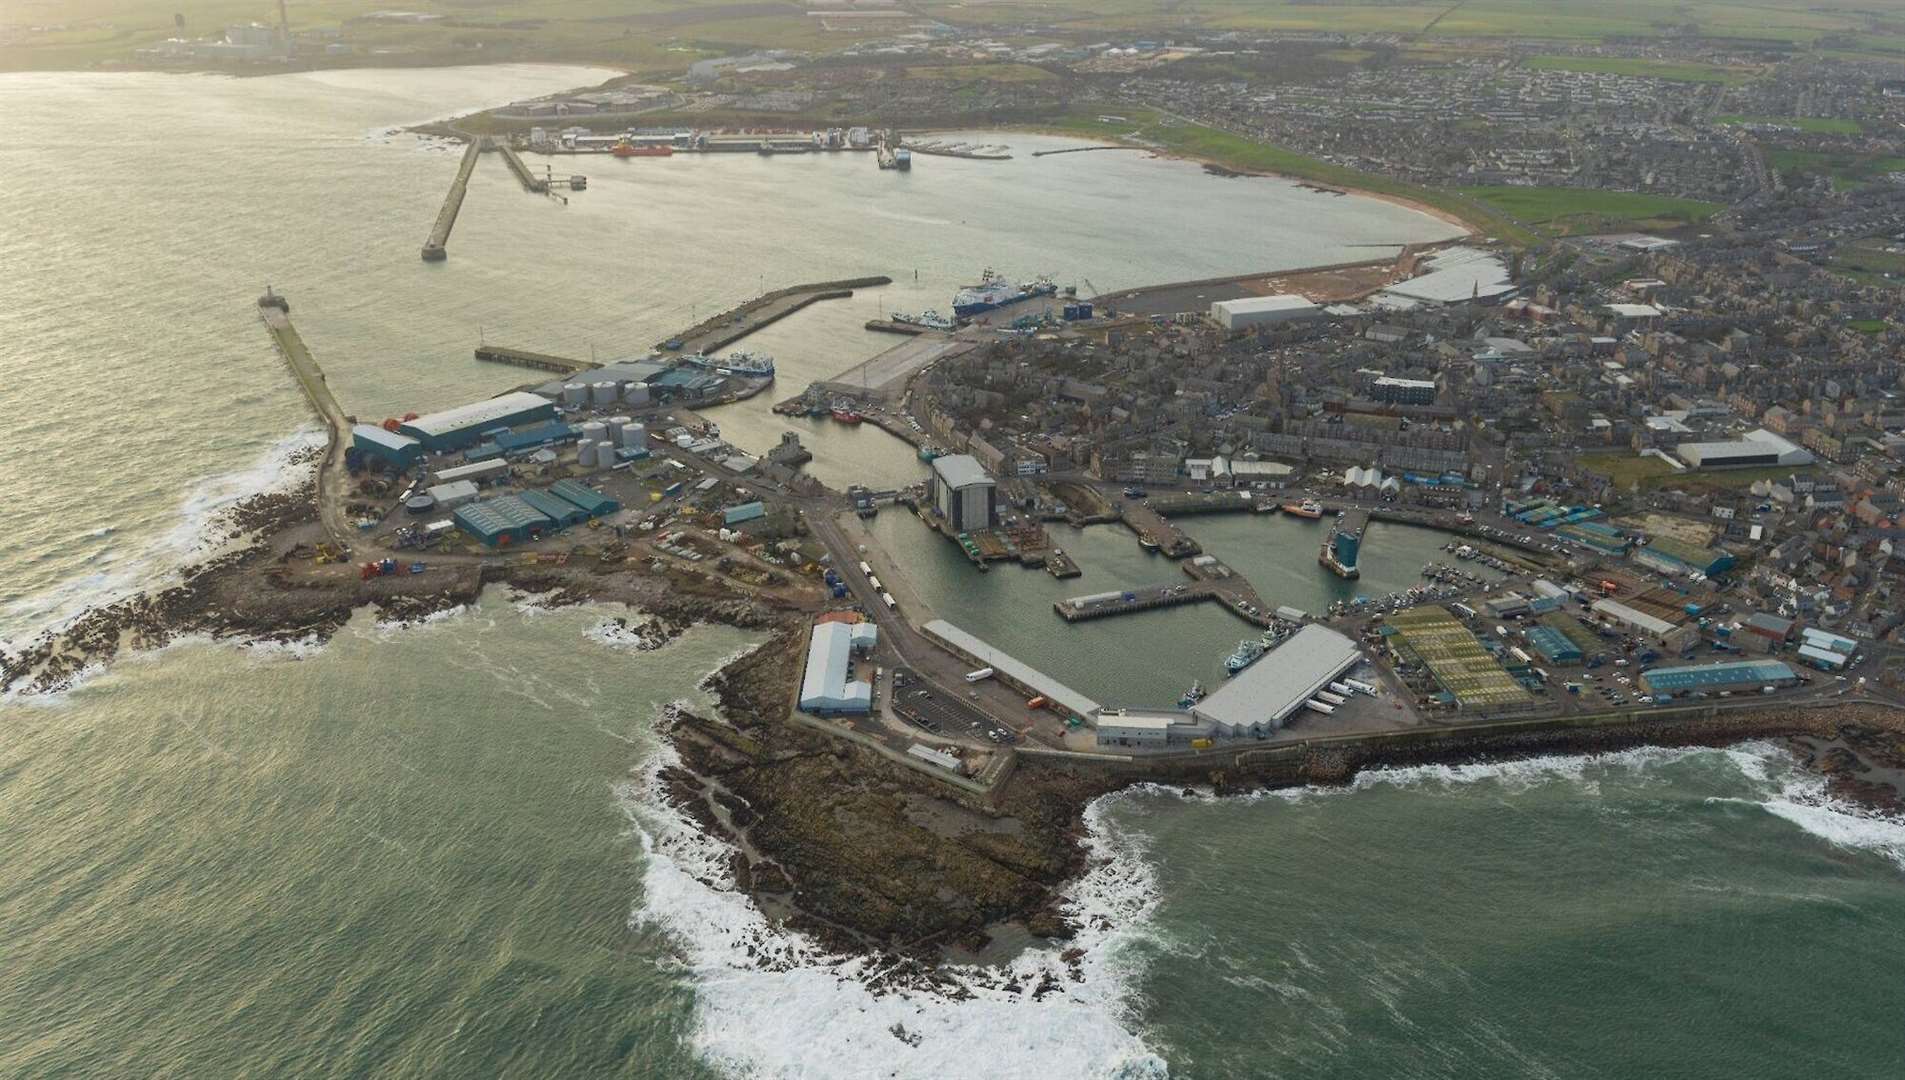 Peterhead looks set to lose out on its bid.